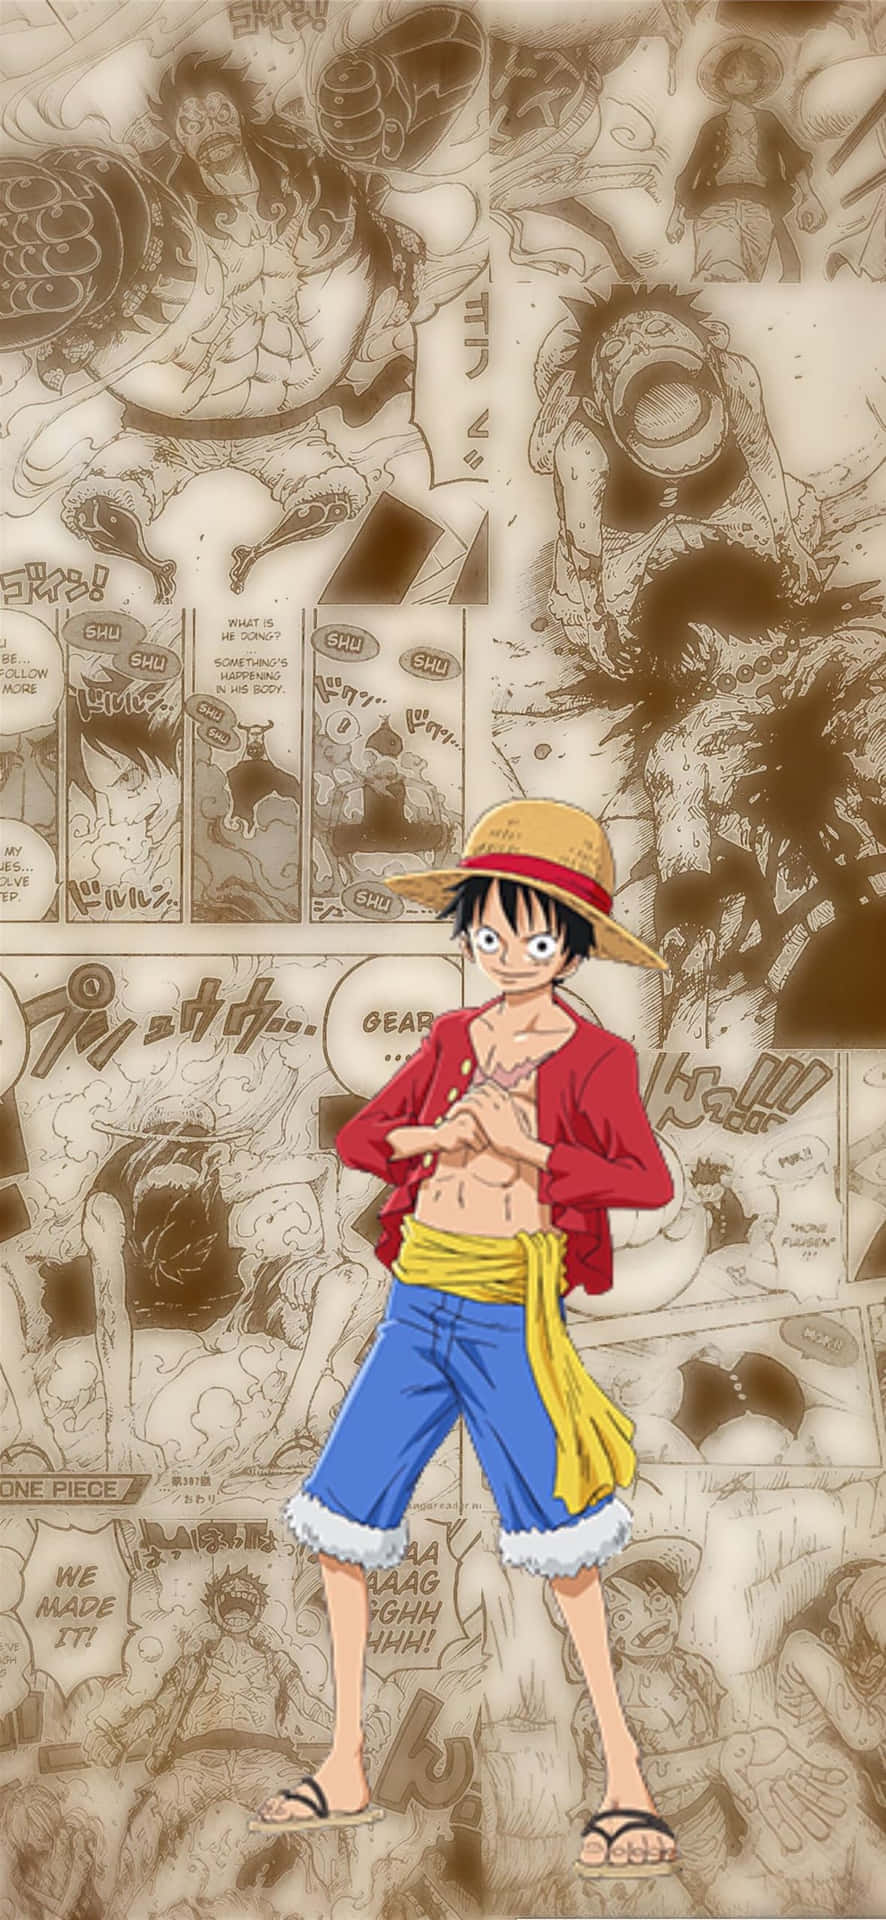 Luffy, the protagonist of the popular anime series One Piece, is all ready to adventure out on an epic journey. Wallpaper